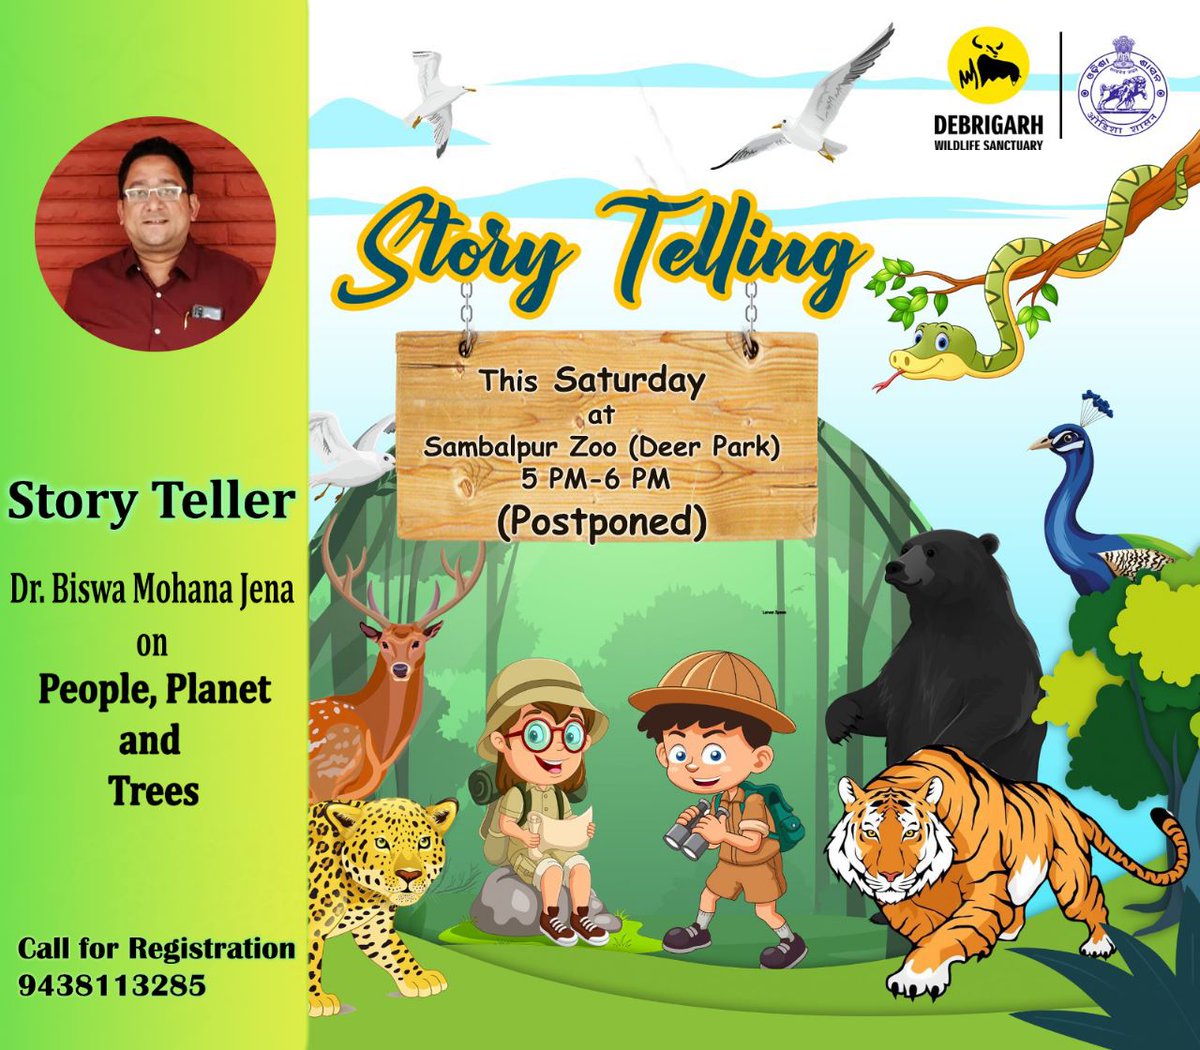 📢 This is to announce today's Story Telling Session at Deer Park, Sambalpur Zoo is *Postponed*. 

Tomorrow's session is as follows 

Story : Eco Conscious Startup Tips 

By : Sasmita Mohapatra 

🗓 25th June'23 

📱 9438113285 

#HirakudWildlifeDivision
@ForestDeptt @pccfodisha